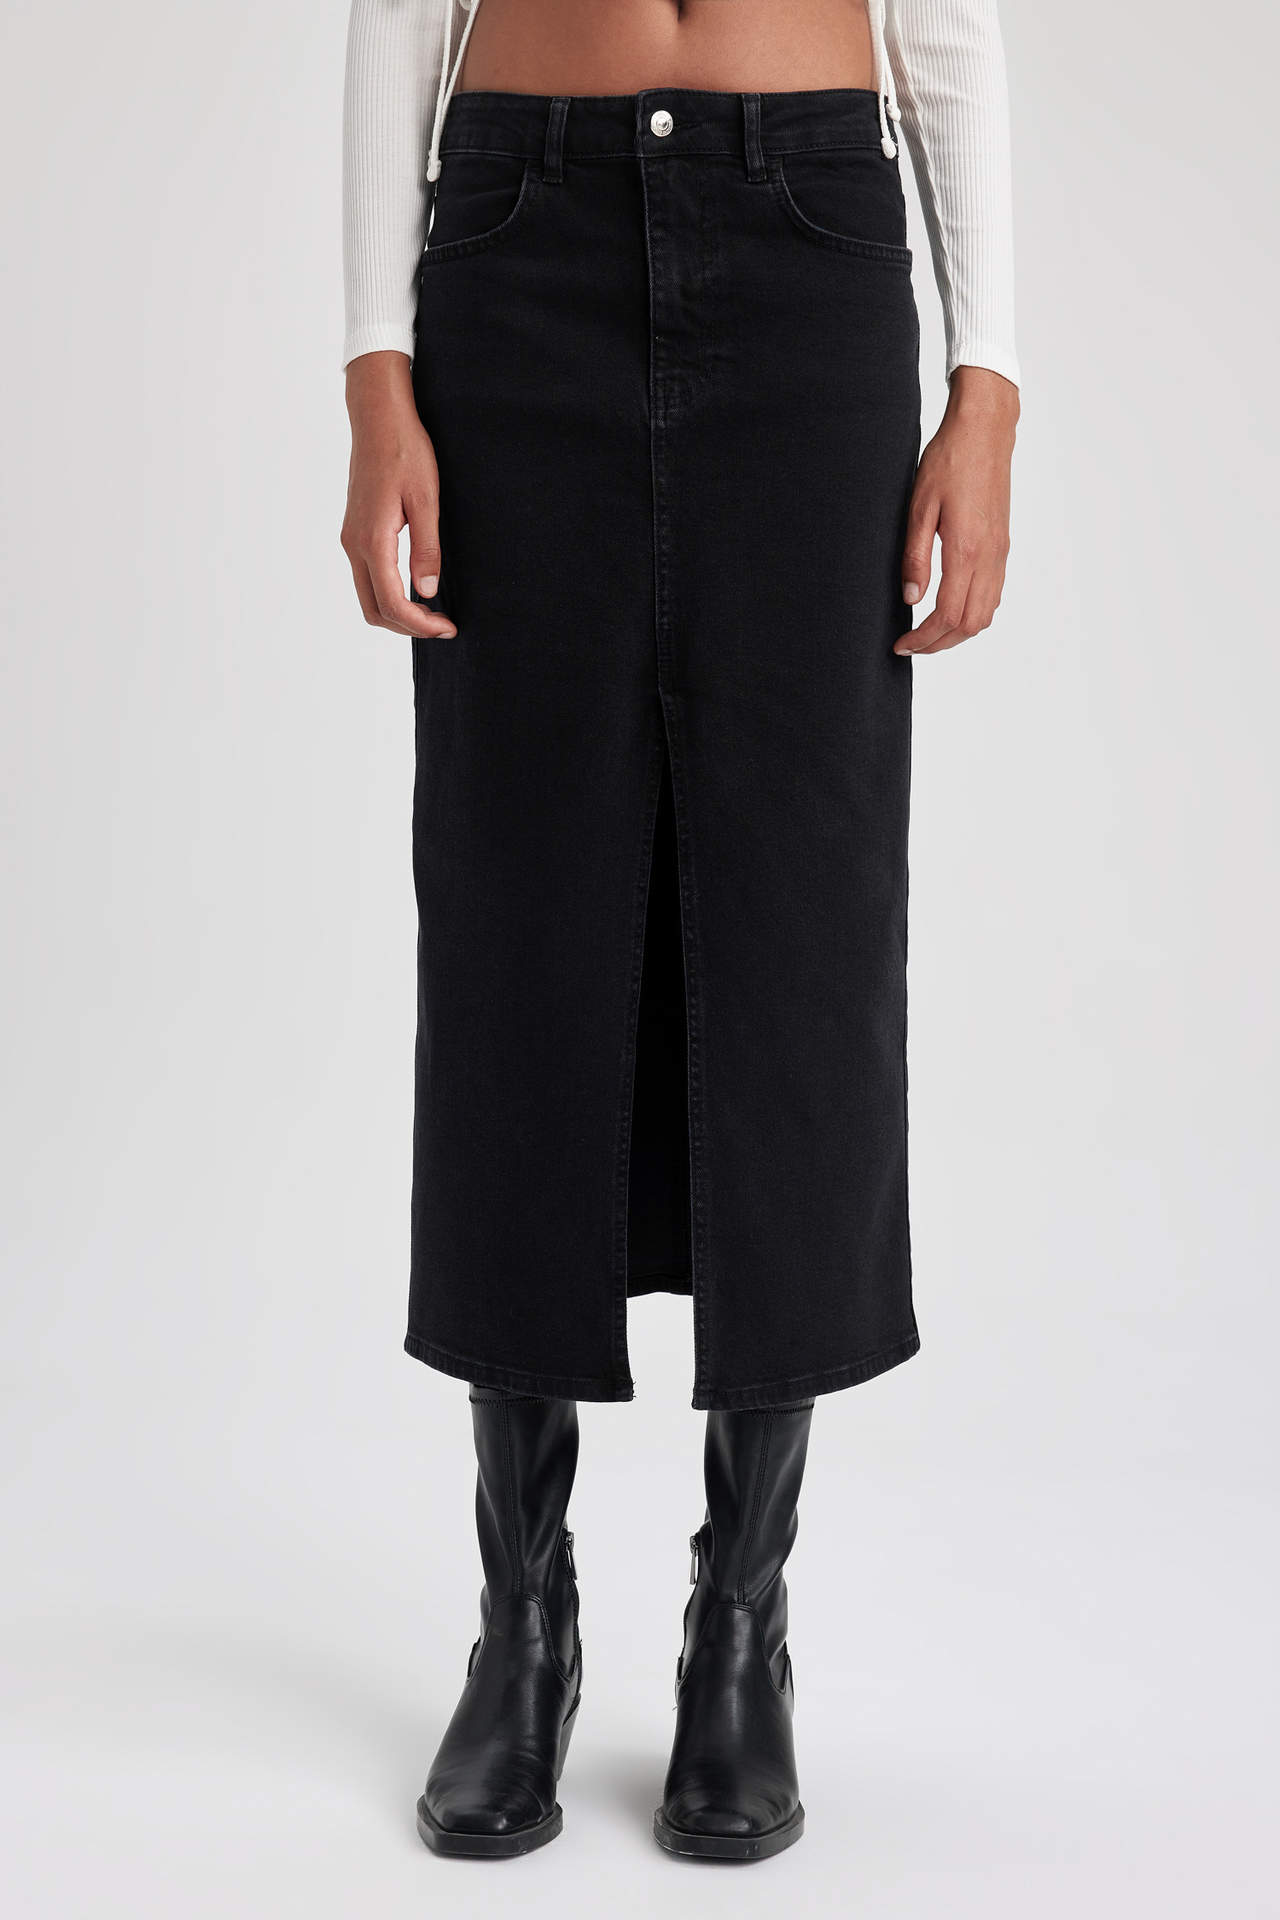 DEFACTO Long Fit Ankle Length Skirt